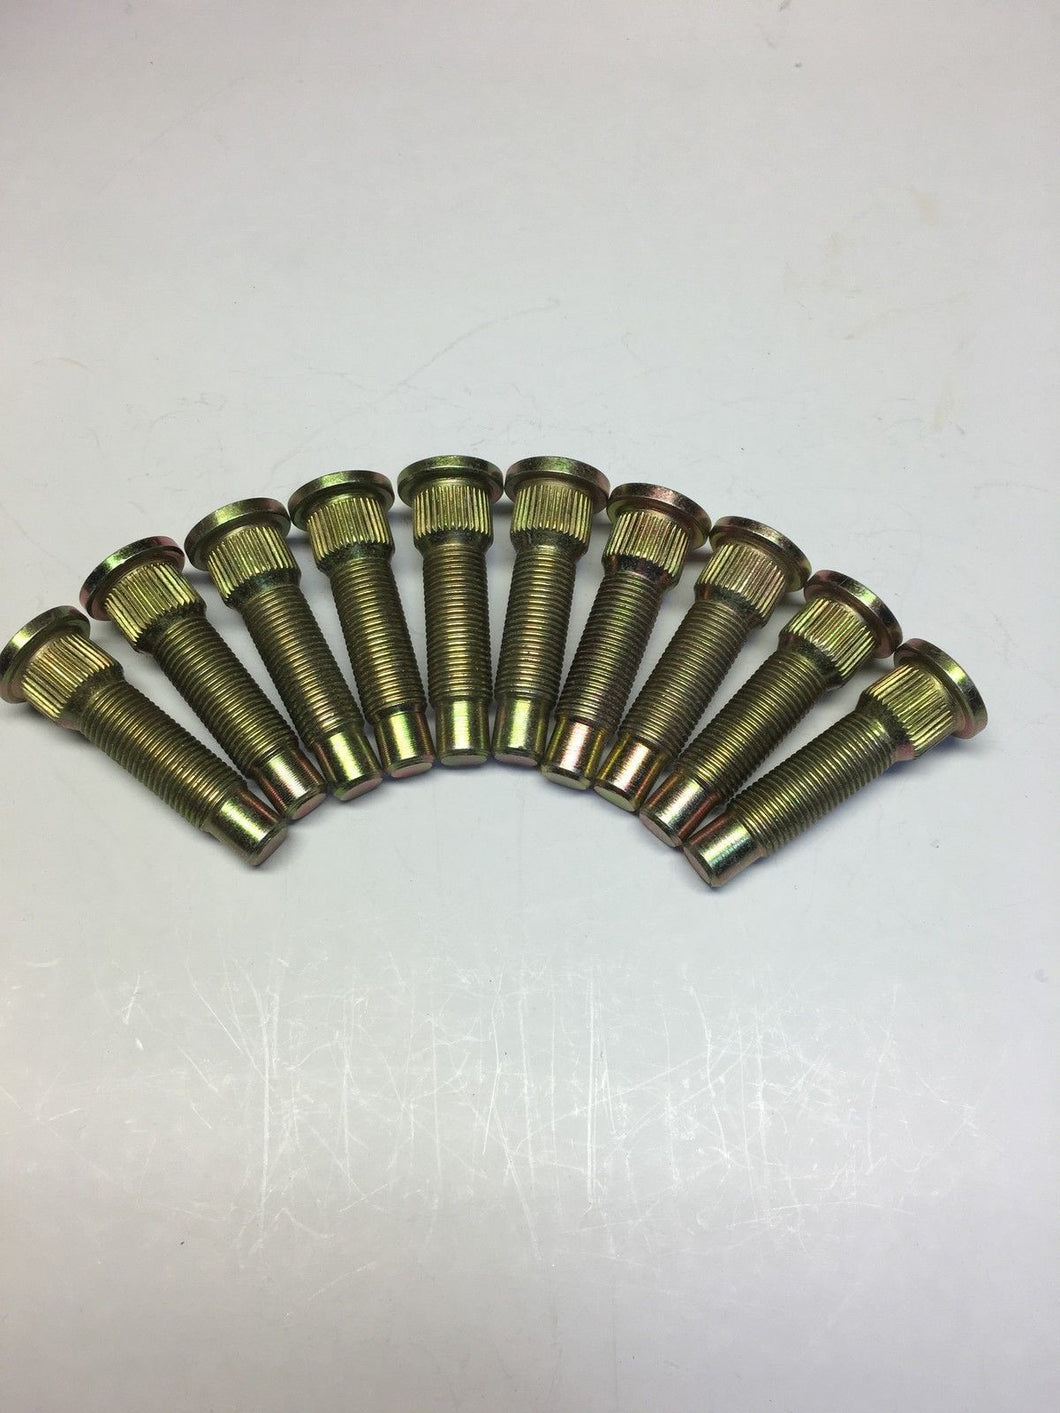 1/2 Ford Falcon  Long wheel studs disc or drum type free shipping B,